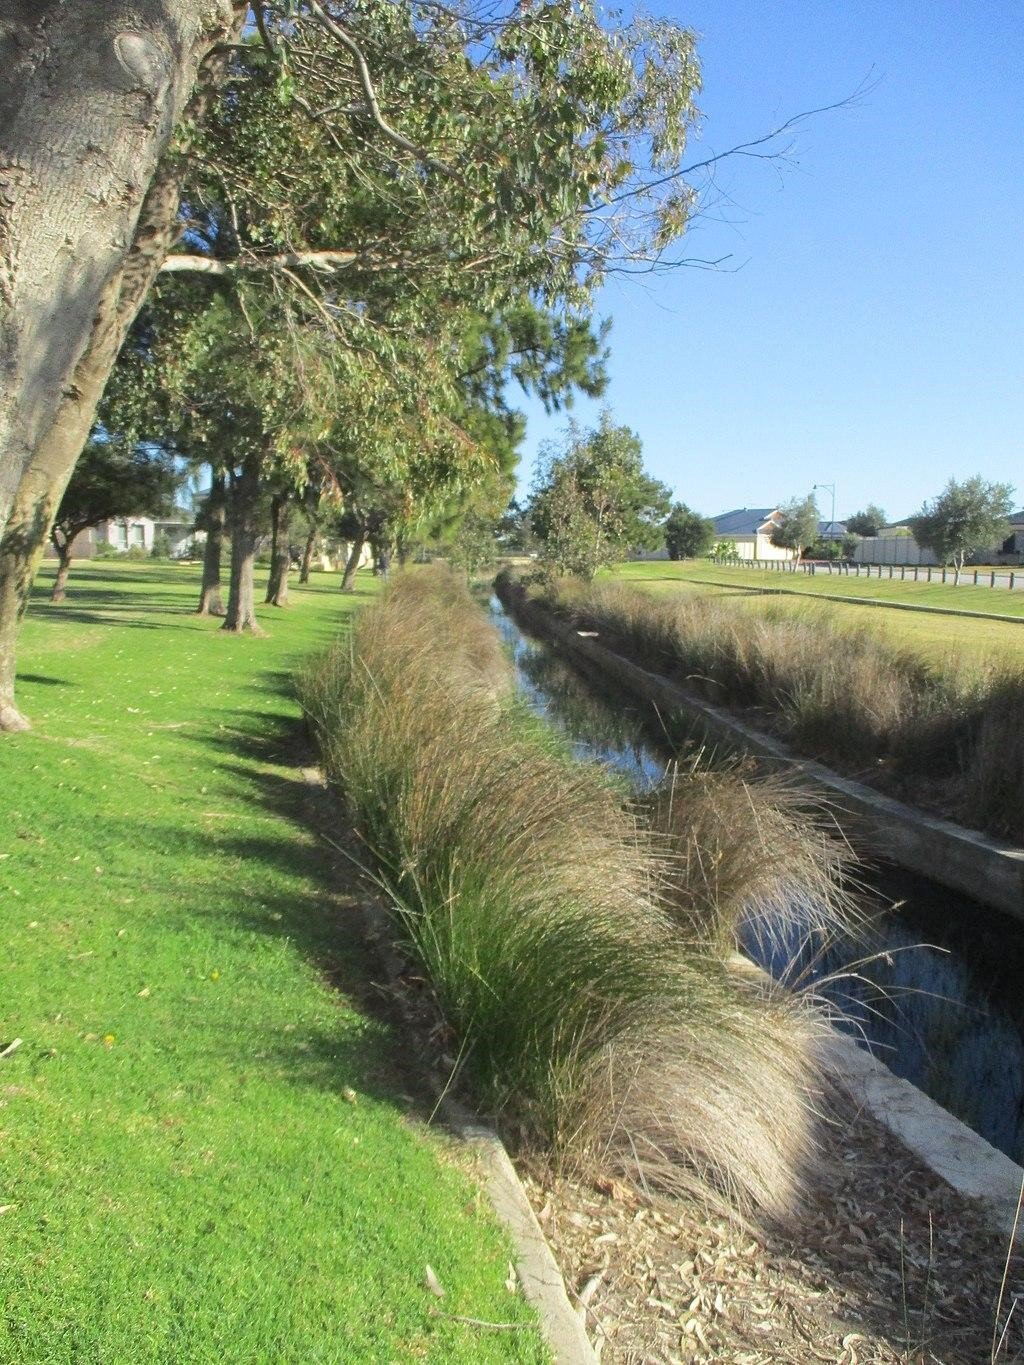 Figure 2: Stormwater drainage canal at Rockingham, Western Australia. Source: Calistemon/CC BY-SA 4.0 